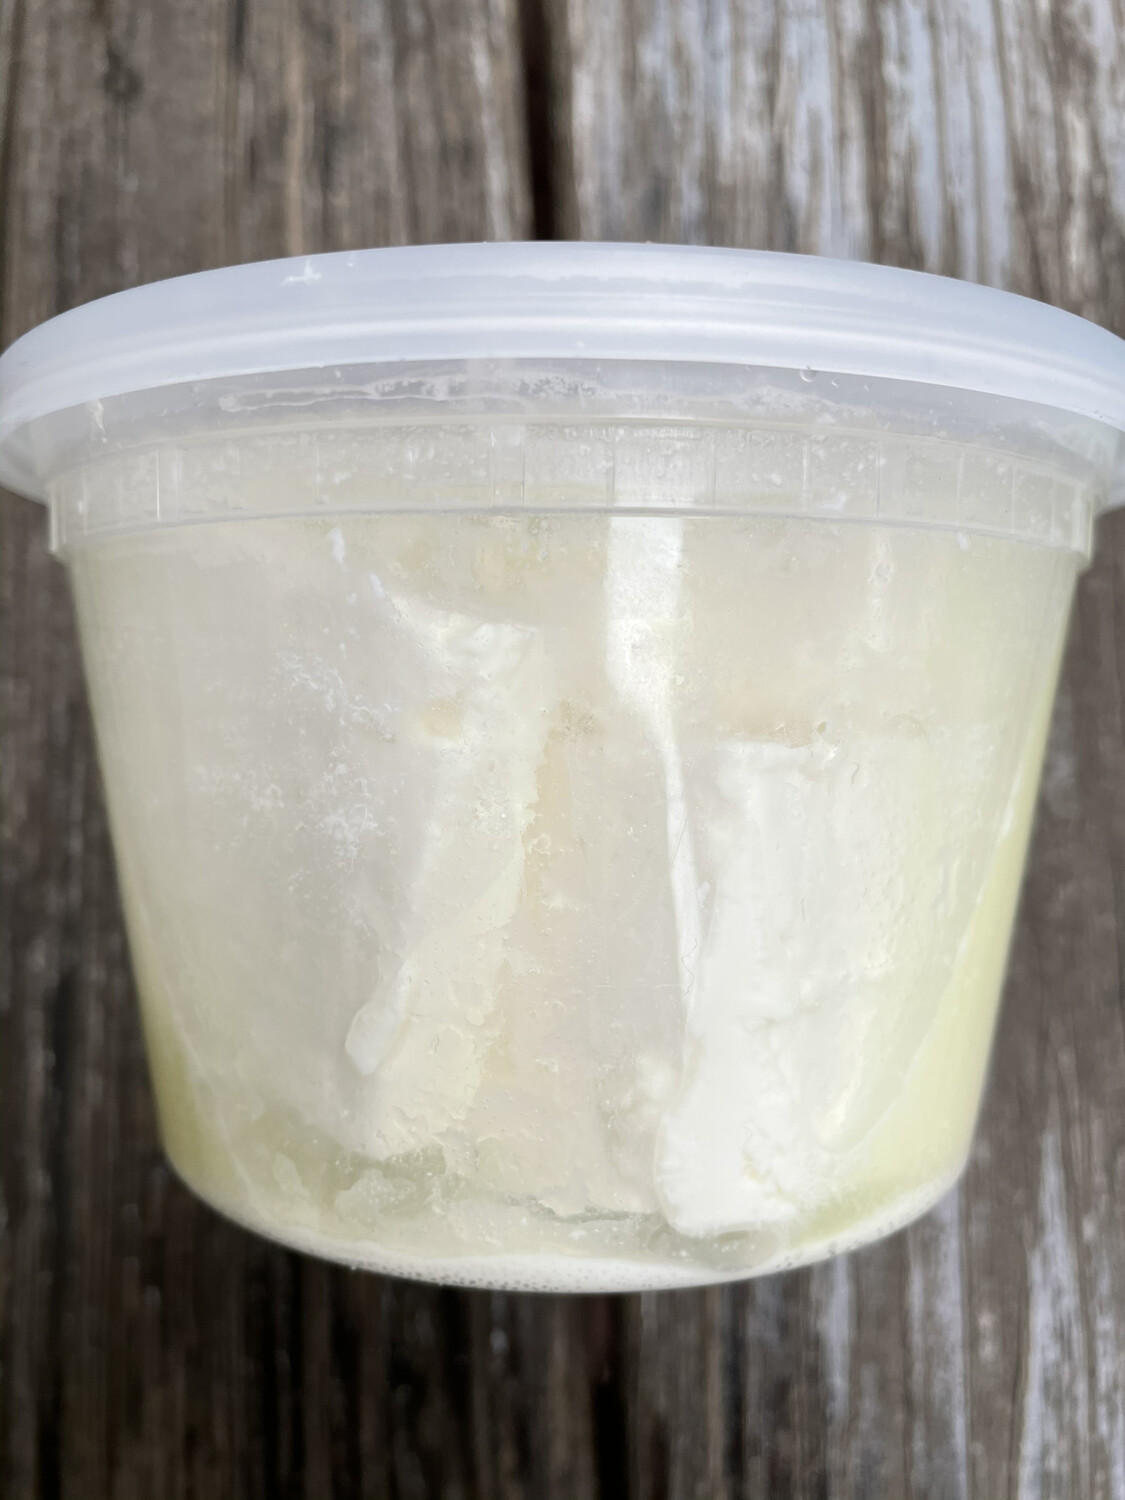 French feta (12 oz) large container